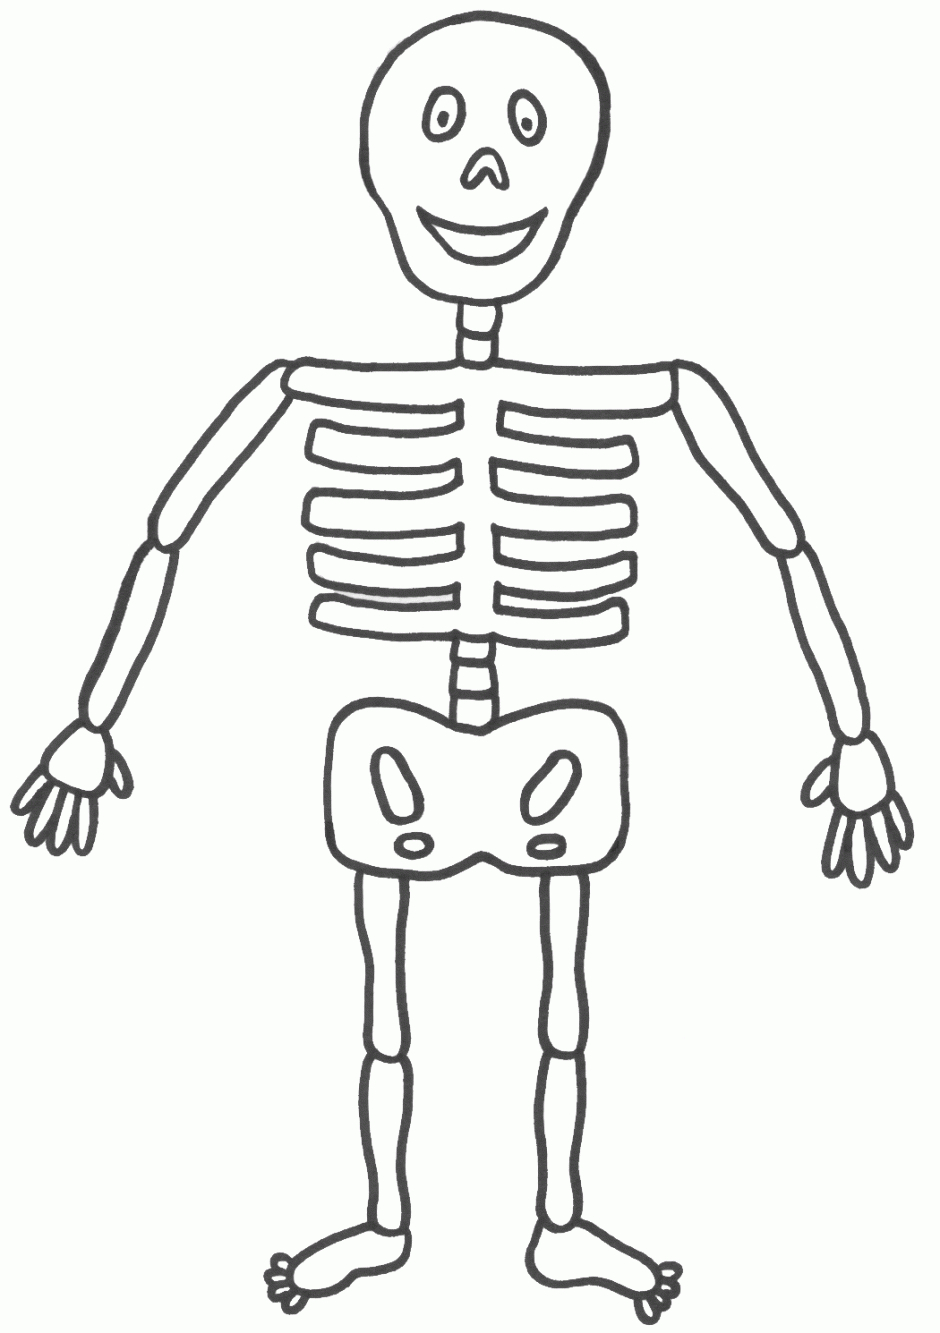 Skeleton Coloring Pages - Free Large Images | Coloring Pages - Free Printable Human Body Template